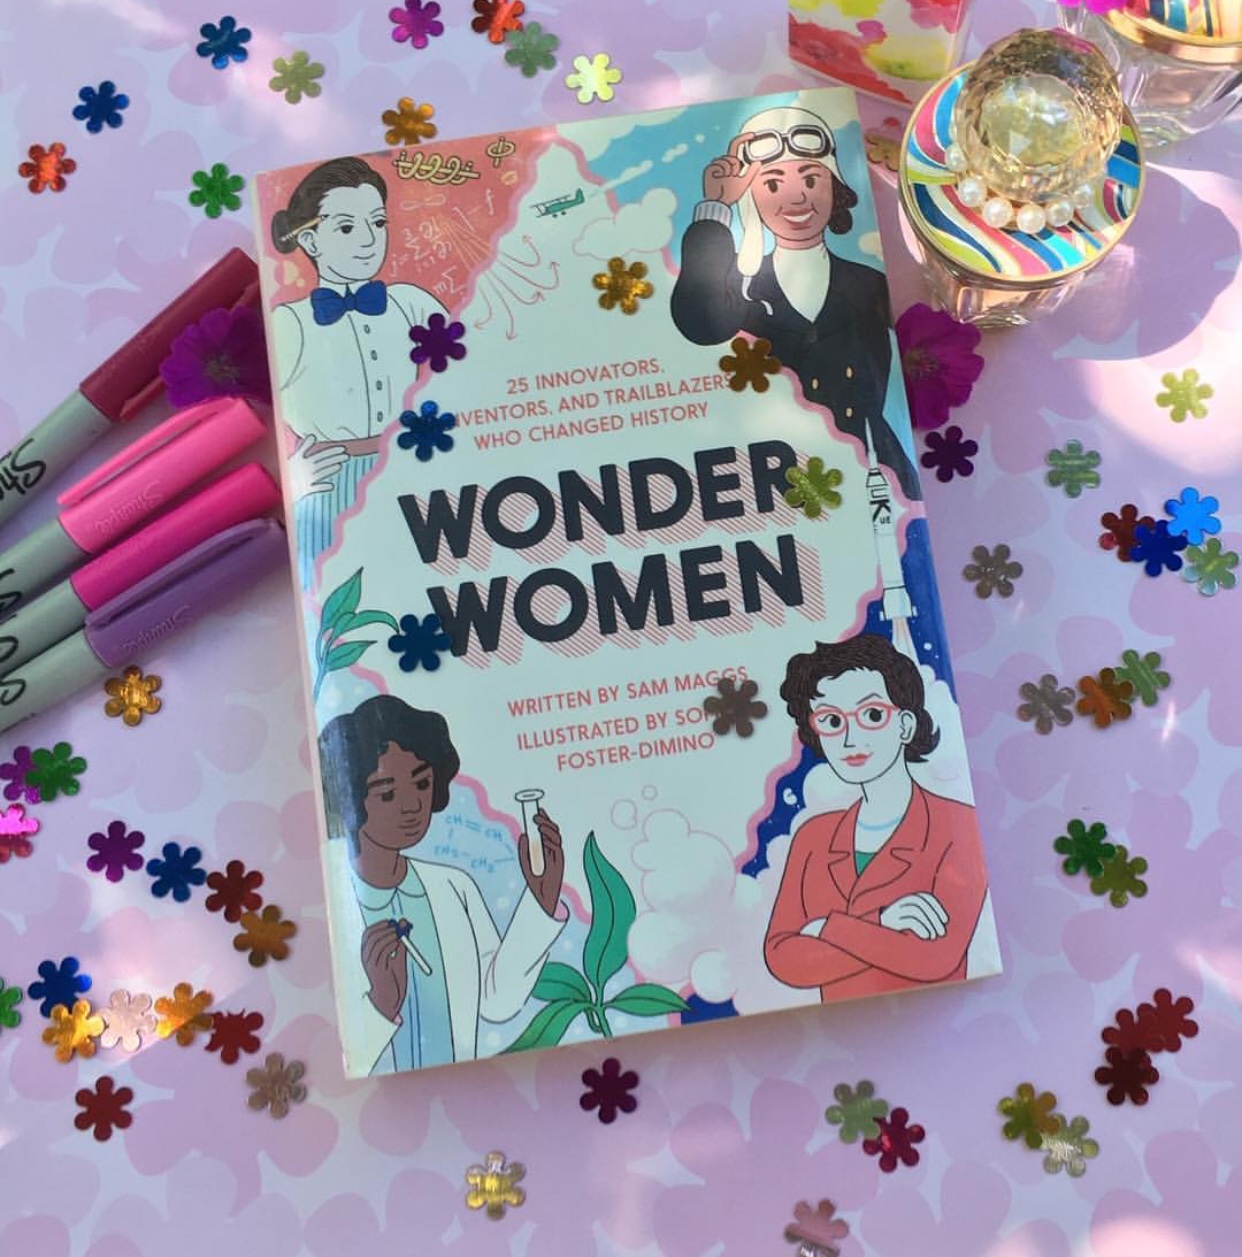 Wonder Women: 25 Innovators, Inventors, and Trailblazers Who Changed History by Sam Maggs – Review